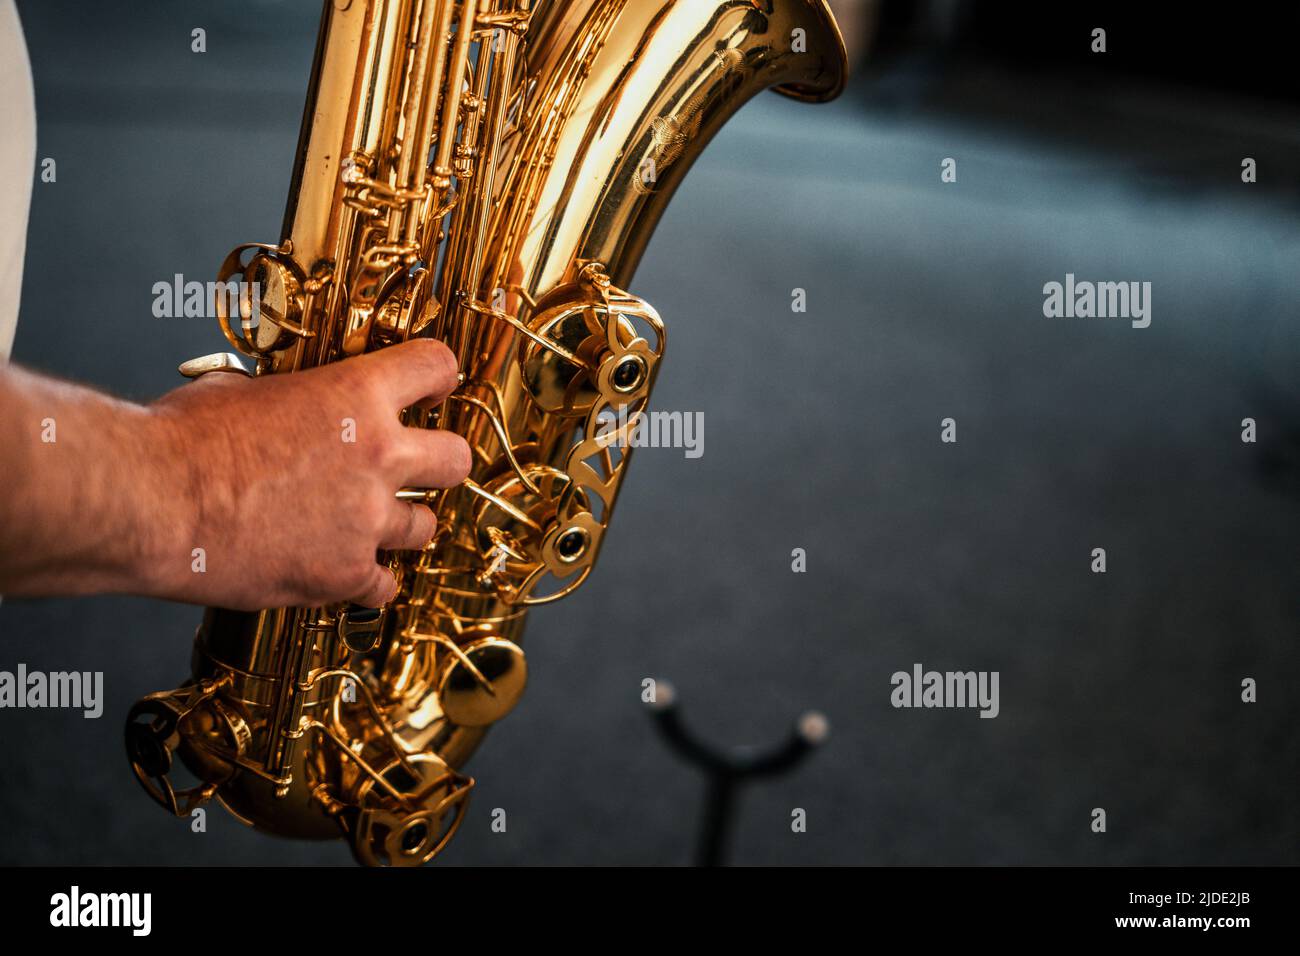 A Saxophone player playing a golden tenor sax Stock Photo - Alamy